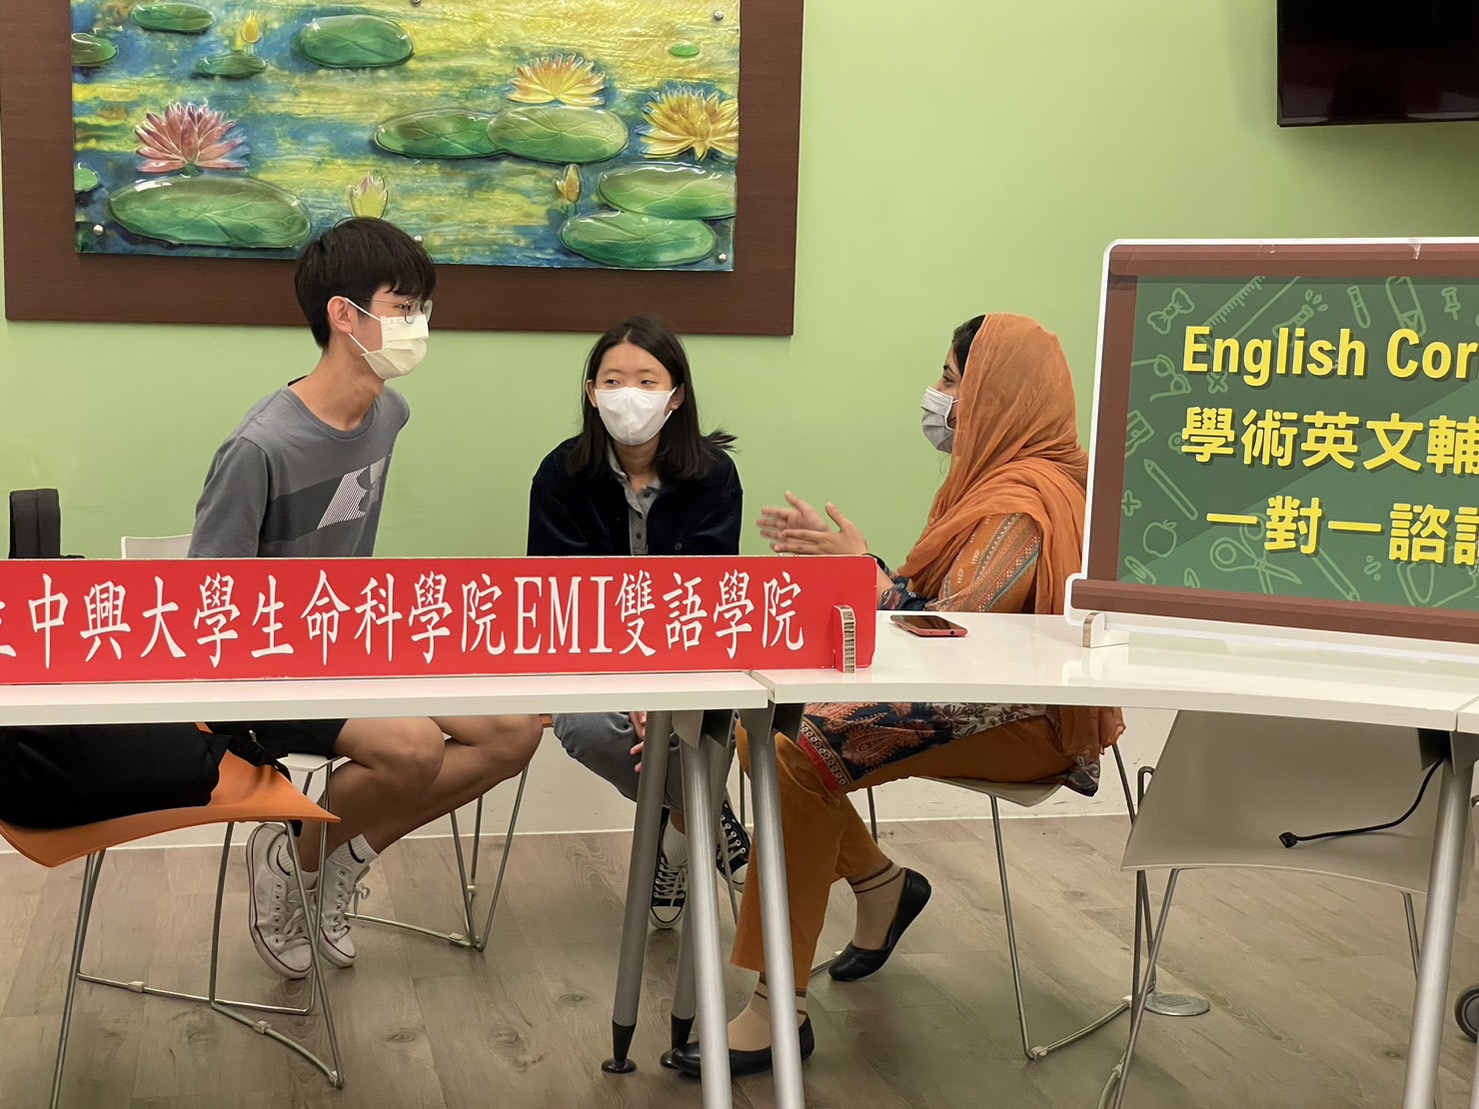 English Corner - Special Topic Discussion " Environmental Engineering"